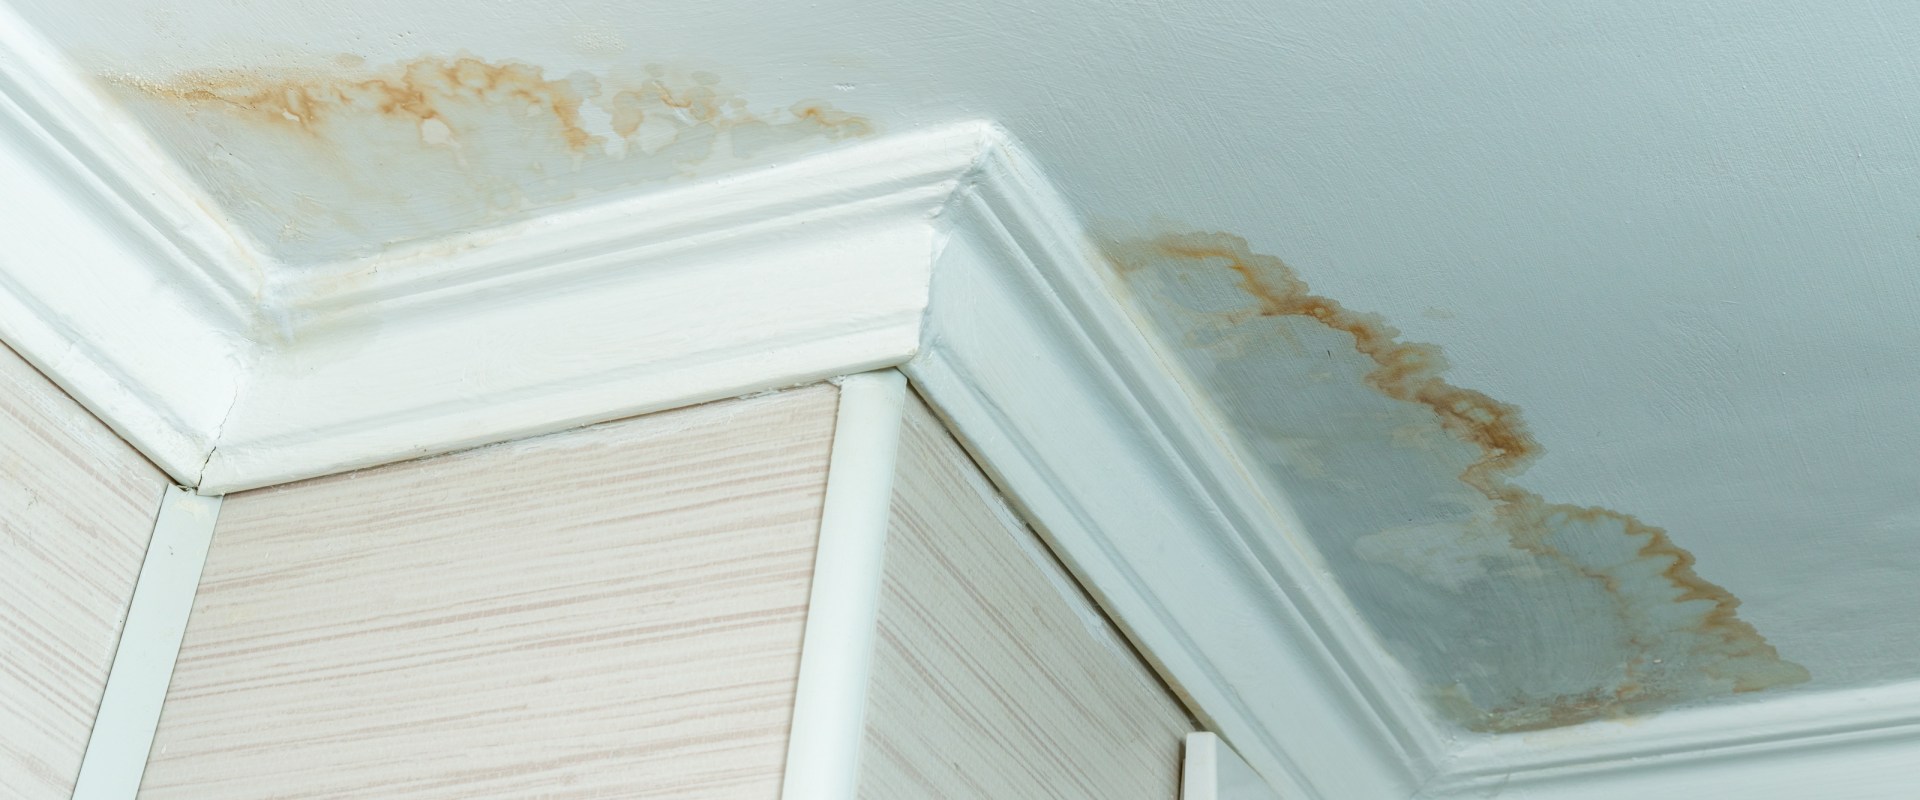 What to Do When You Paint Over Water Damage